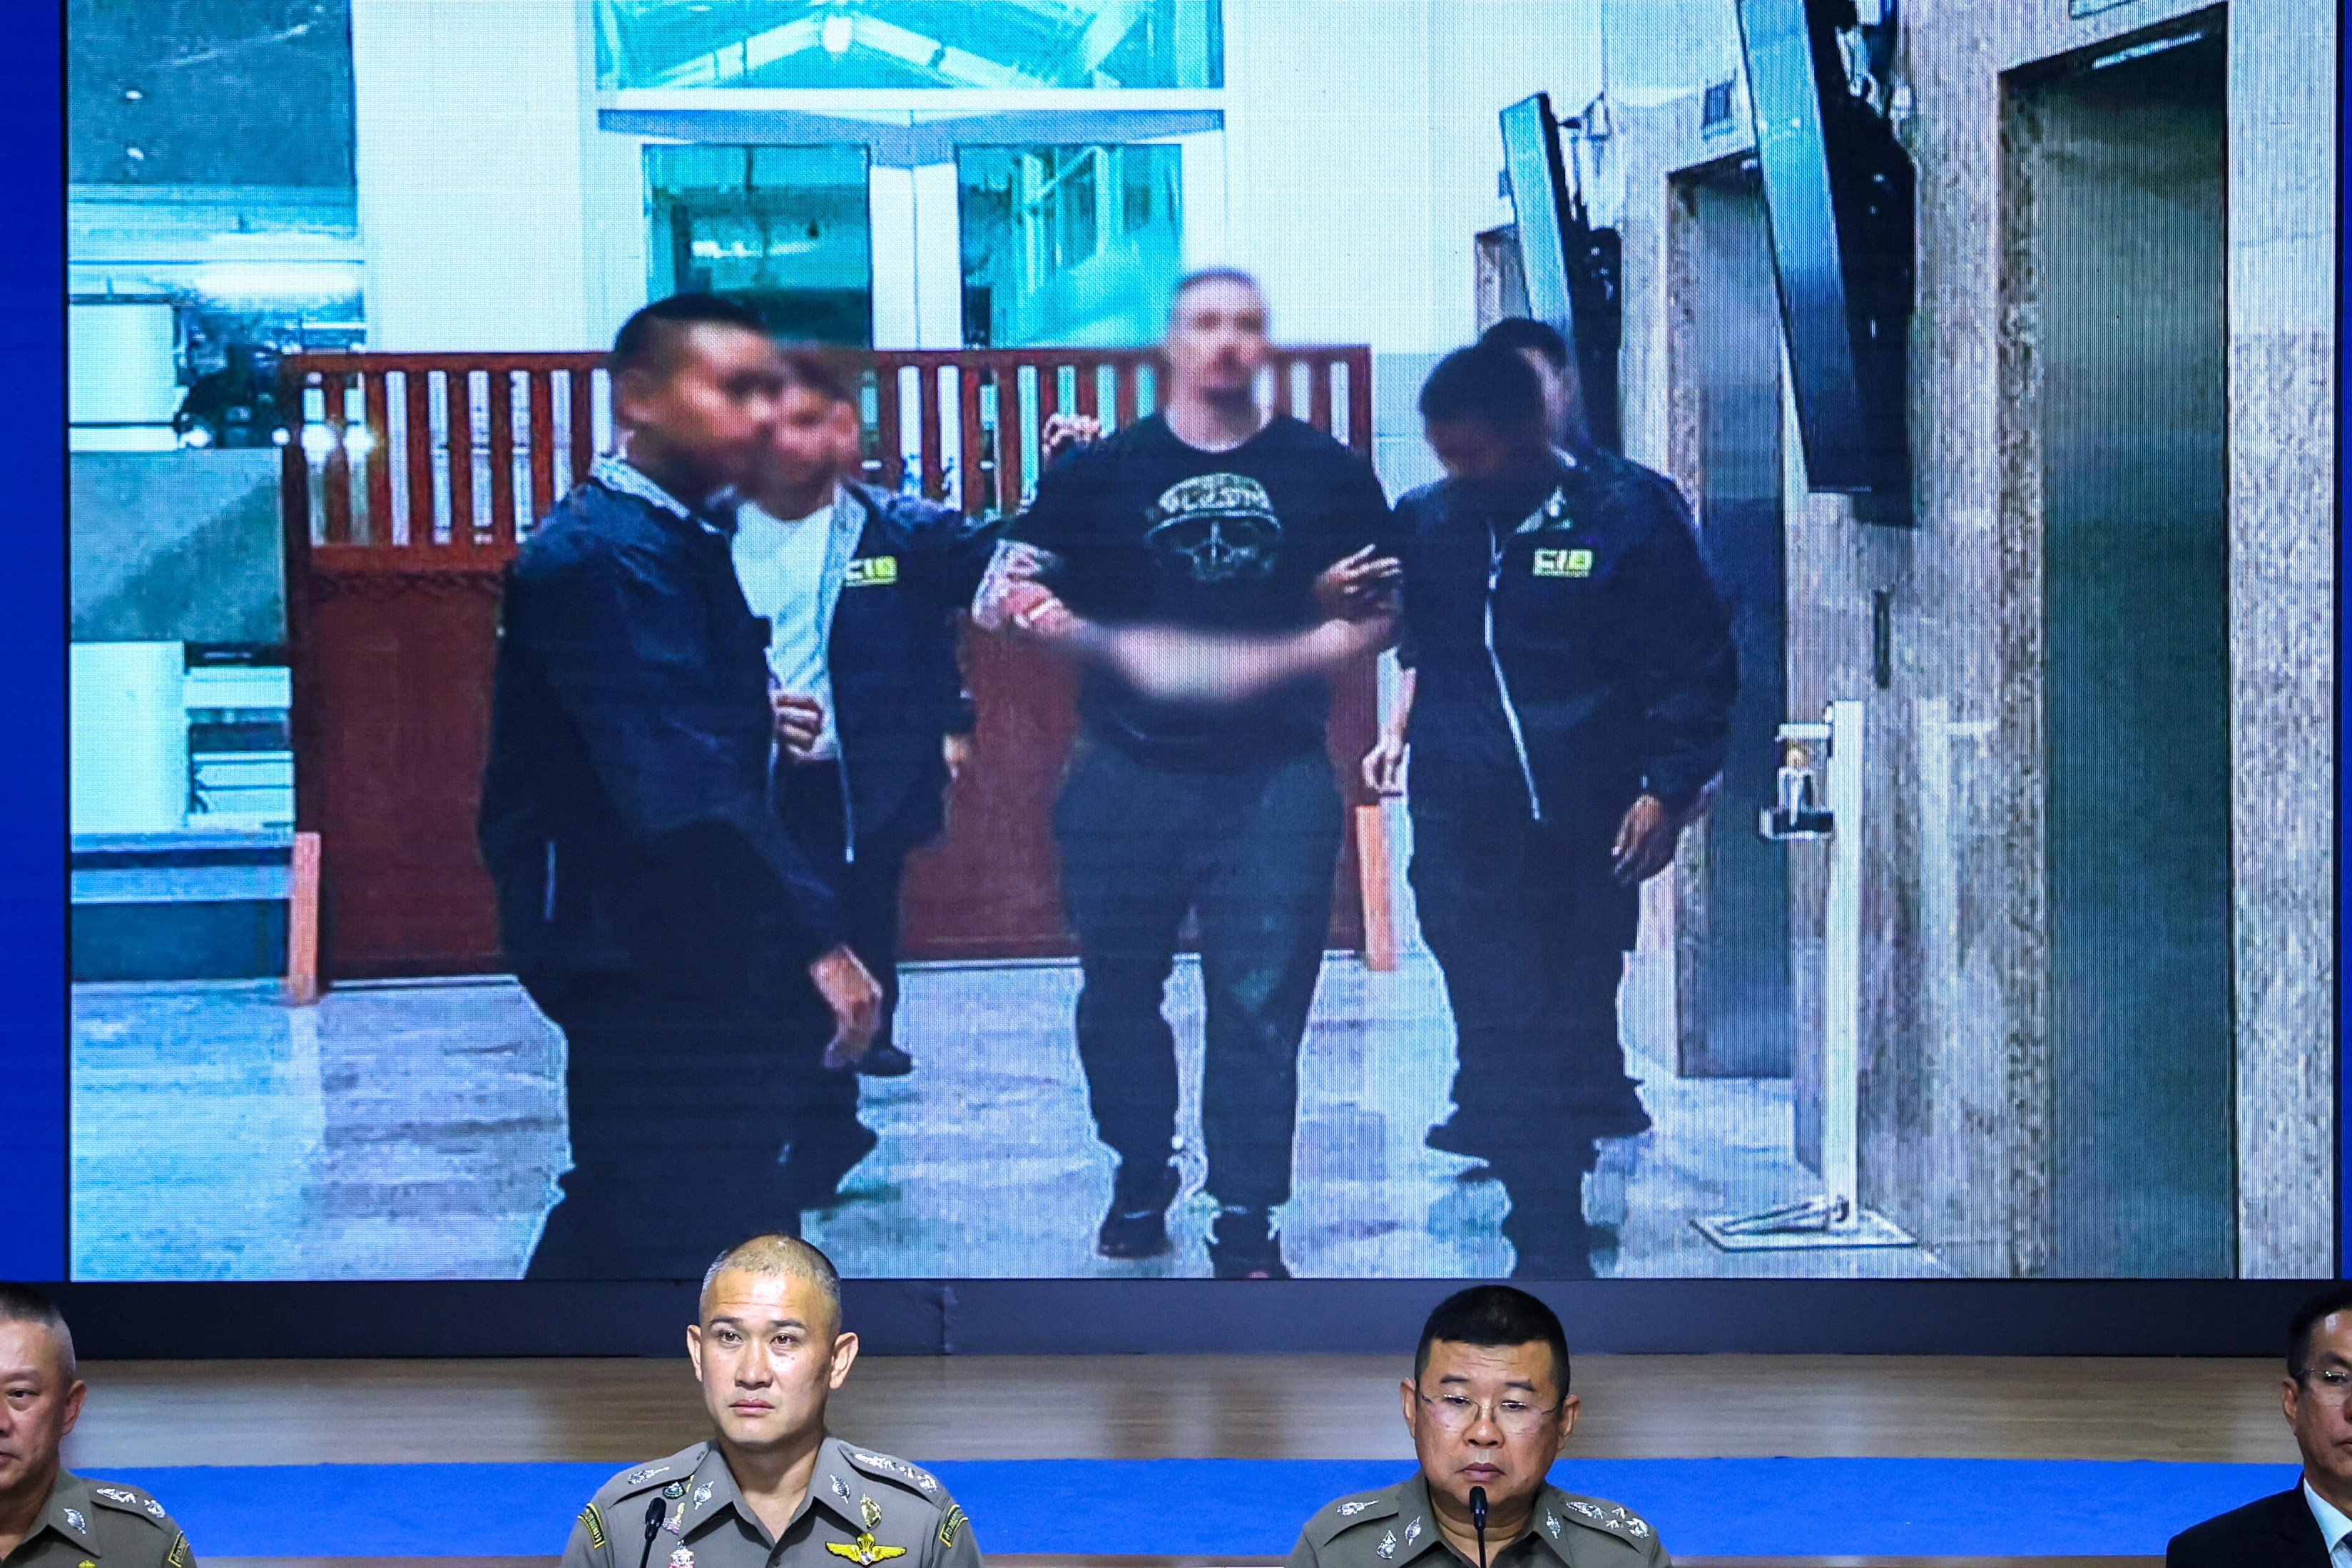 Canadian contract killer arrives in Thailand following extradition